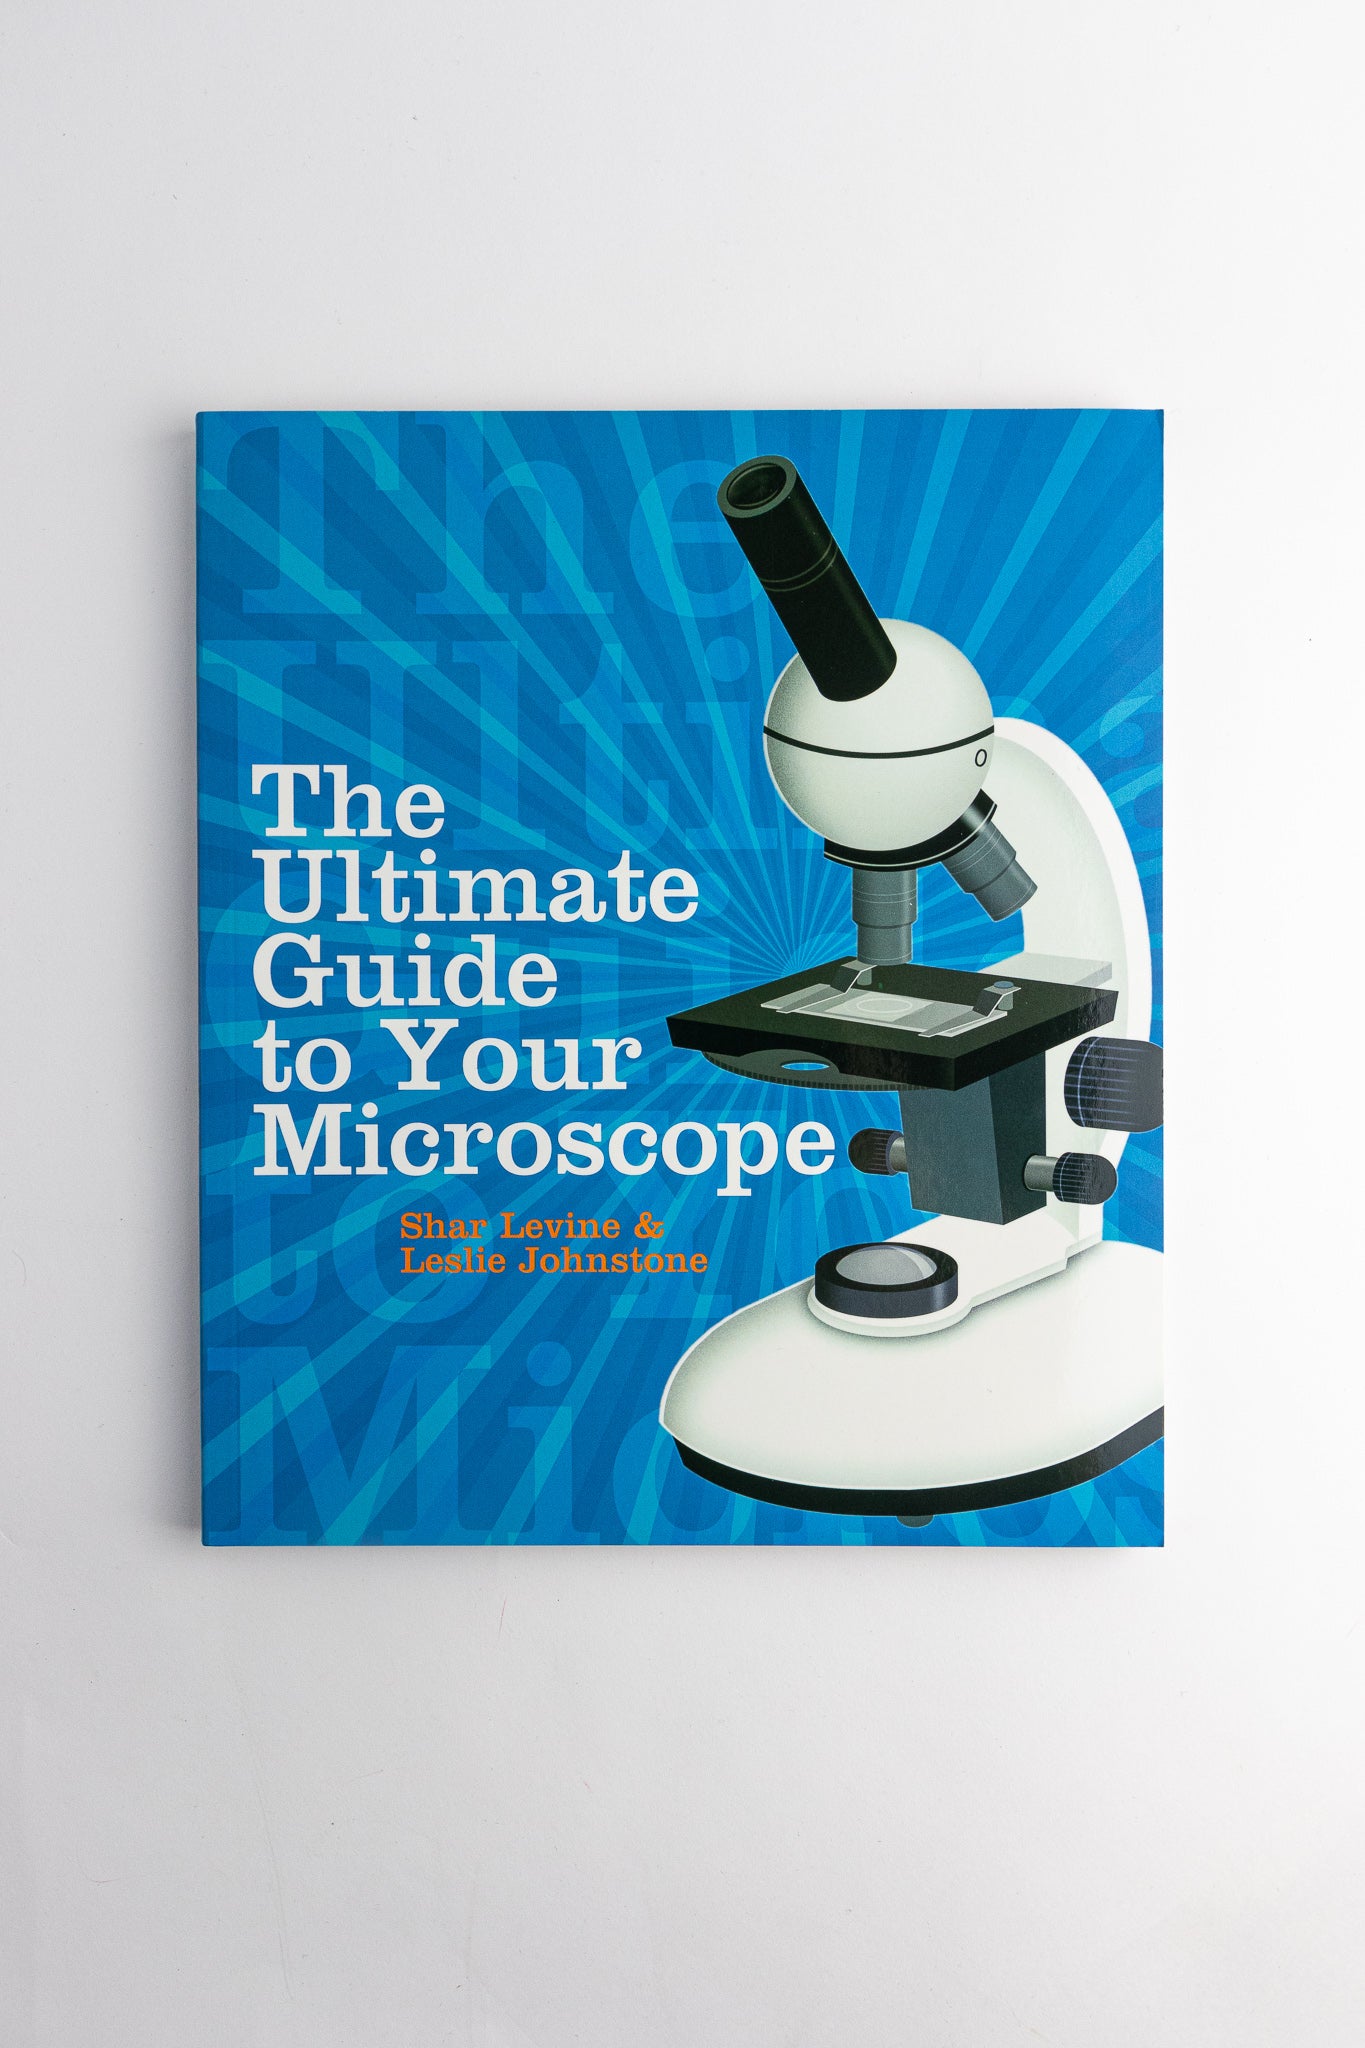 The Ultimate Guide to Your Microscope - Stemcell Science Shop